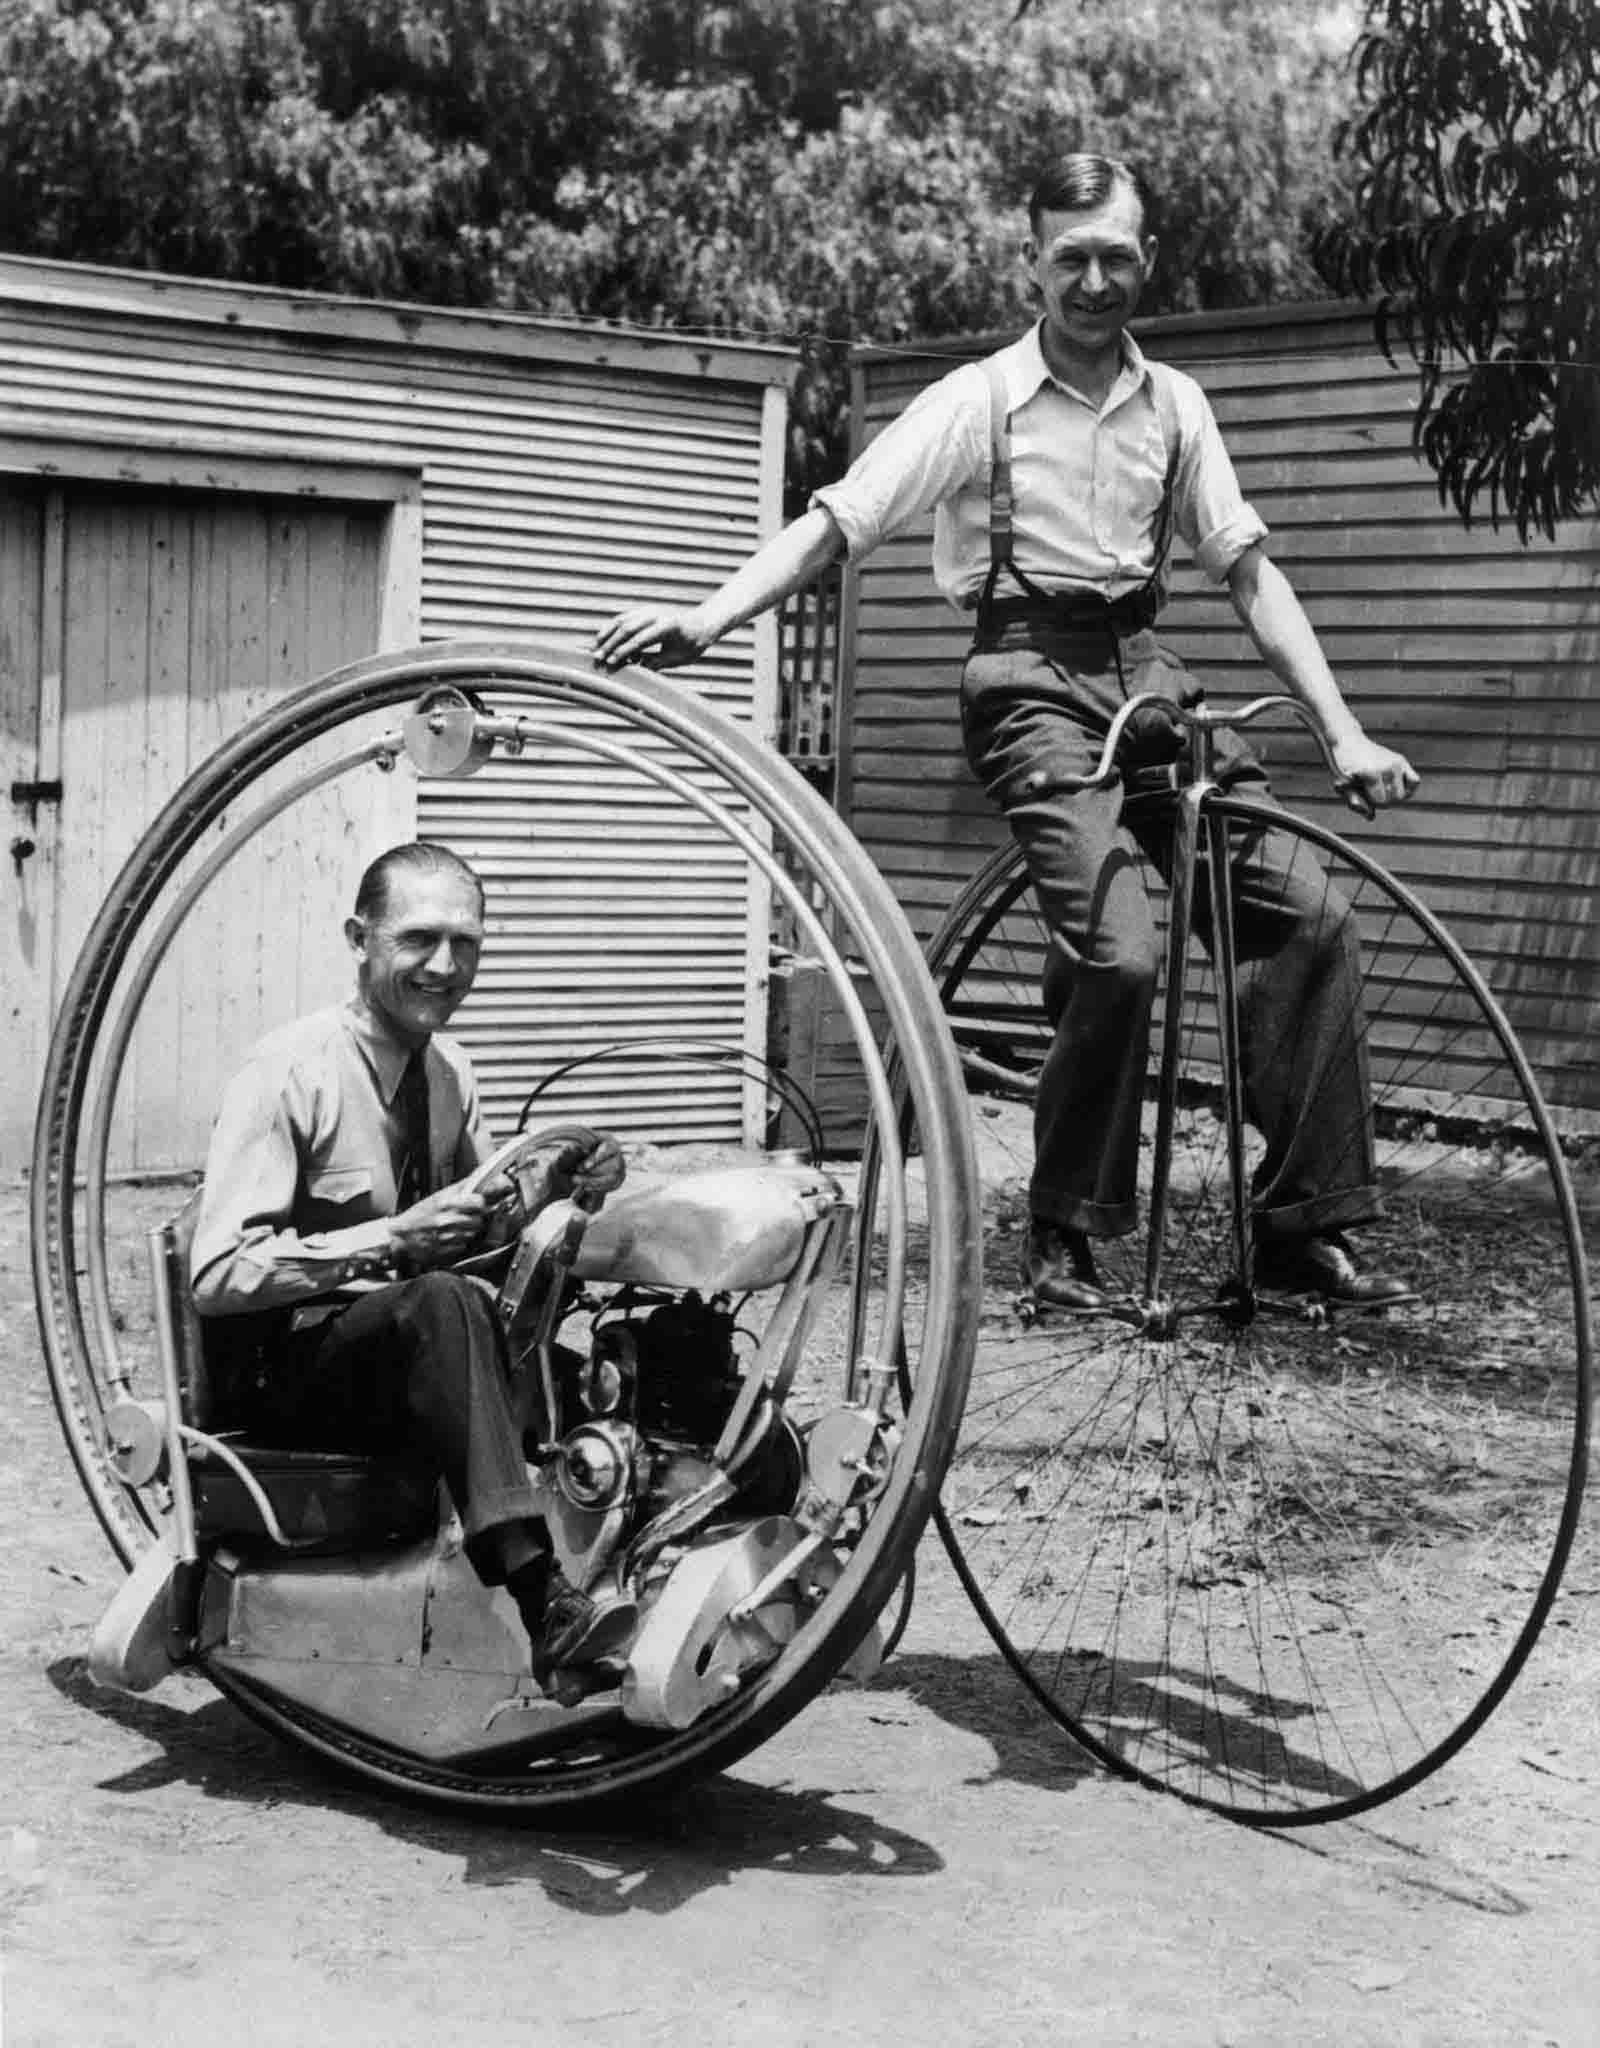 A man on a penny-farthing bicycle alongside Walter Nilsson aboard the Nilsson monowheel, 1935.